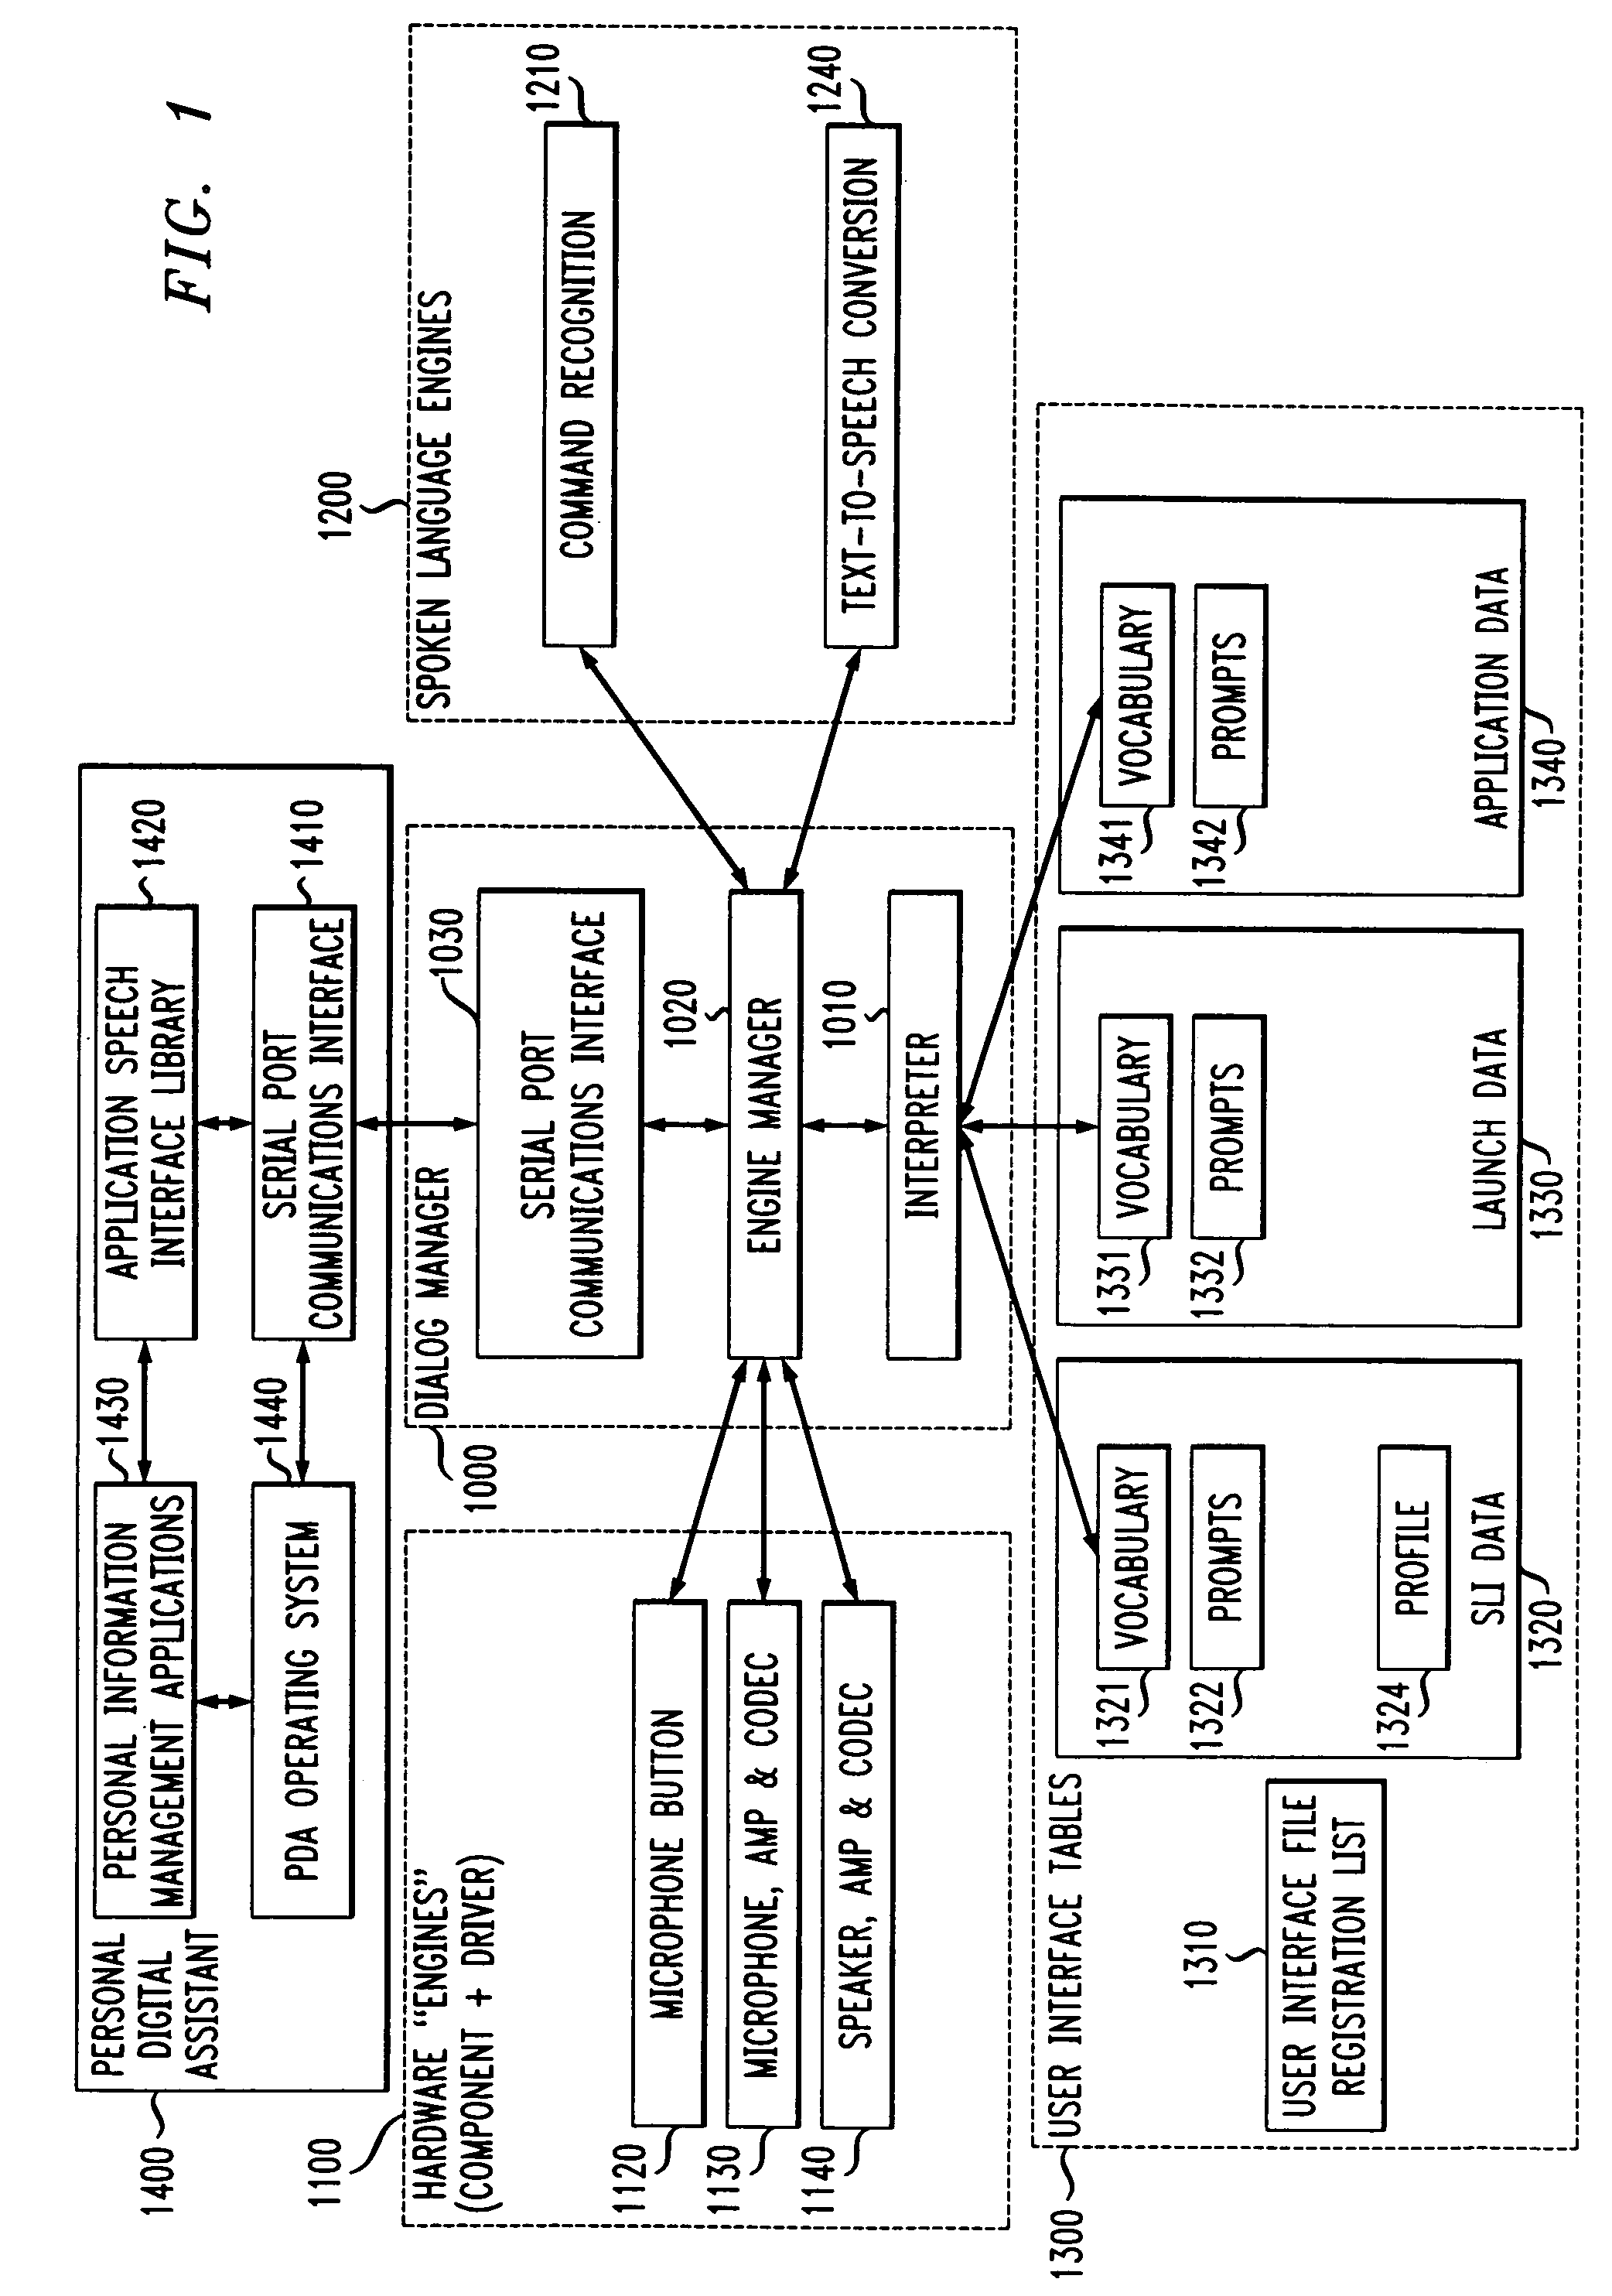 Methods and apparatus for contingent transfer and execution of spoken language interfaces